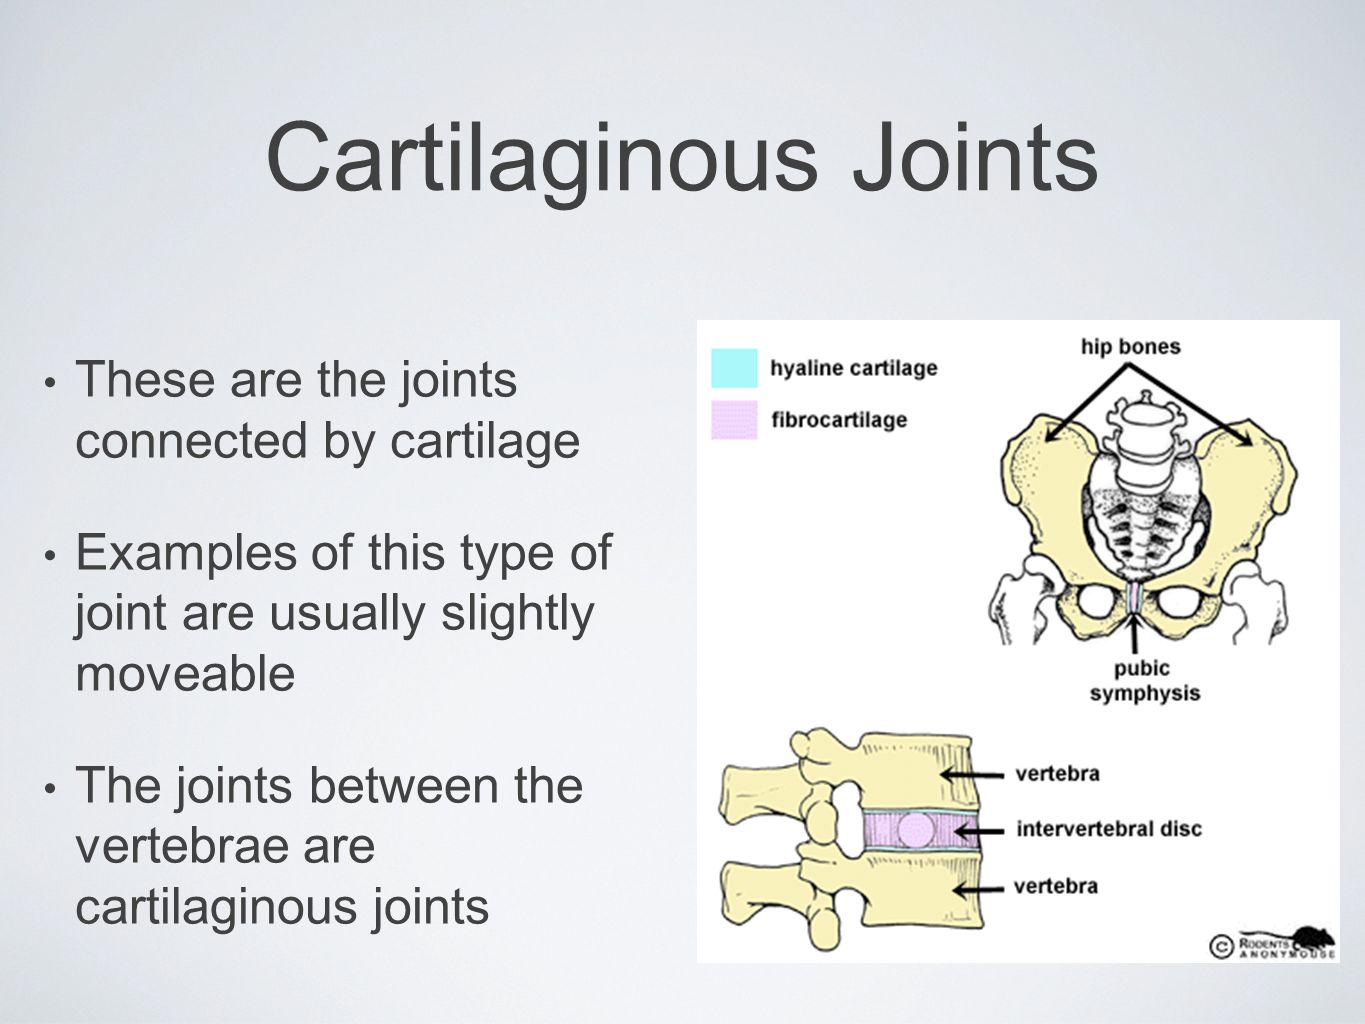 Cartilaginous Joints These are the joints connected by cartilage